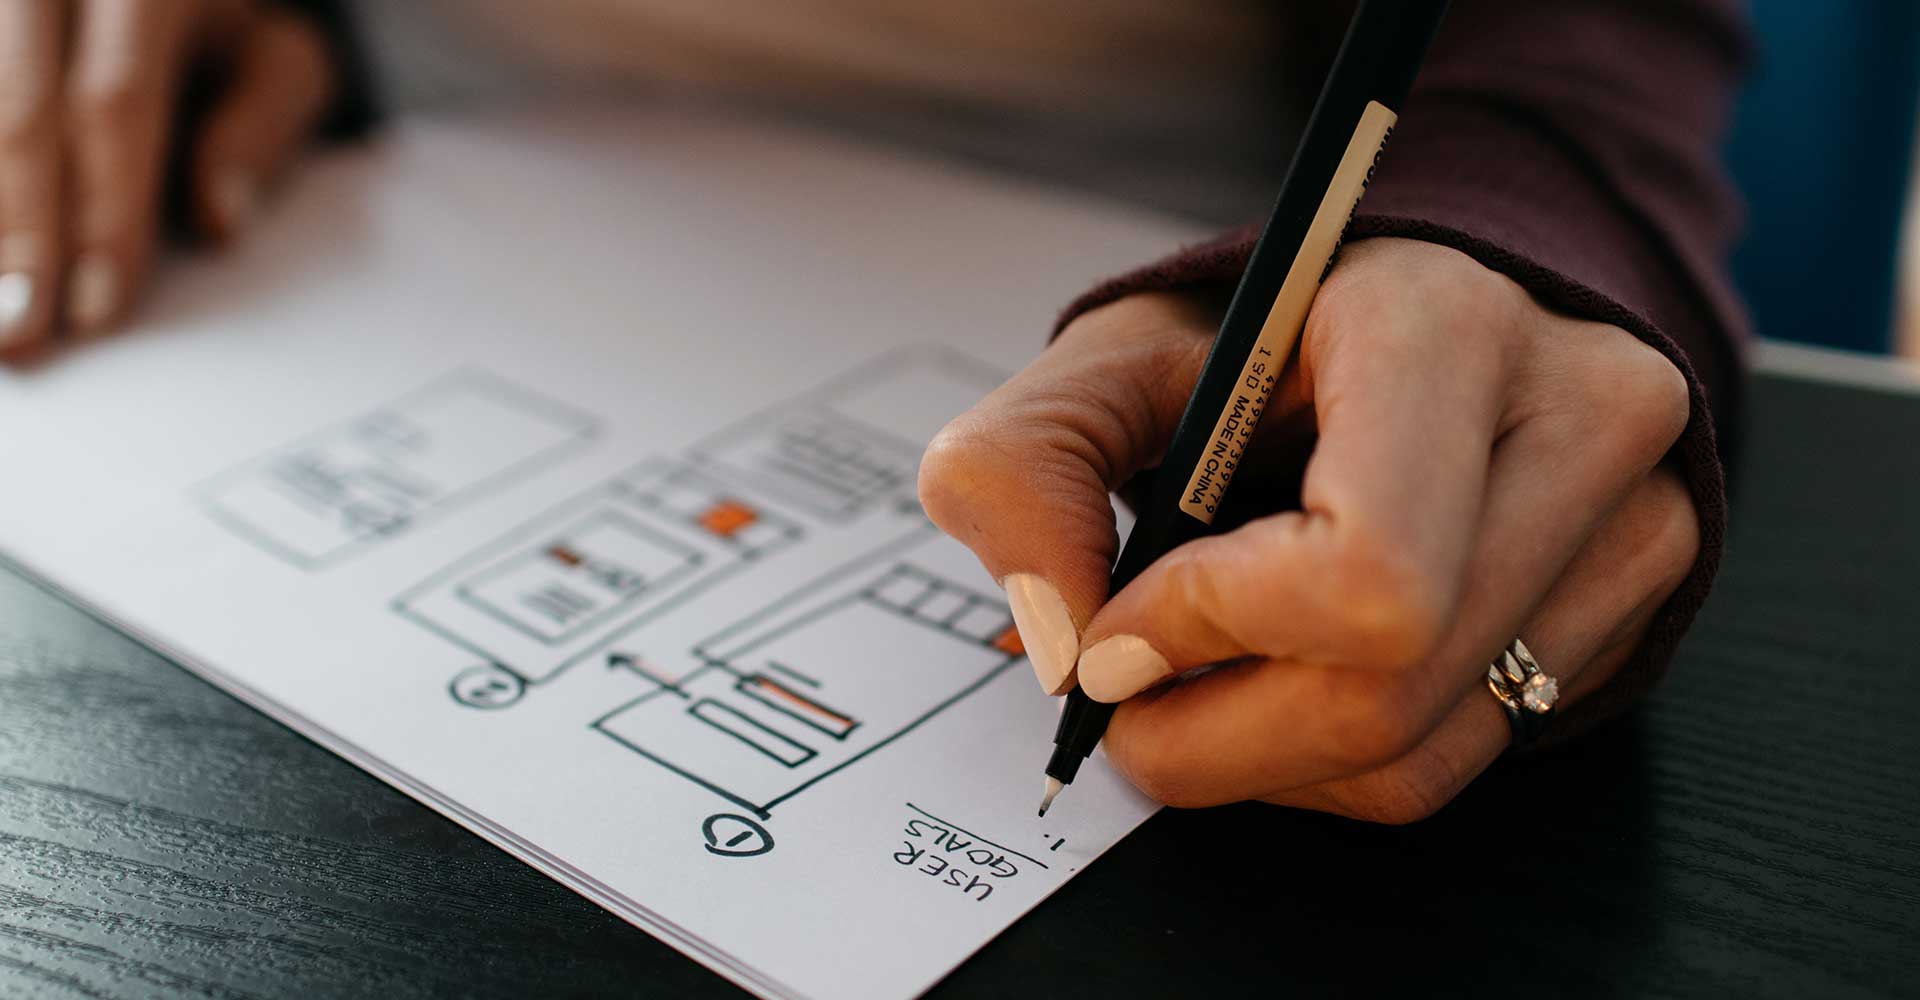 Image showing someone sketching a flow on paper suggesting drafting a project